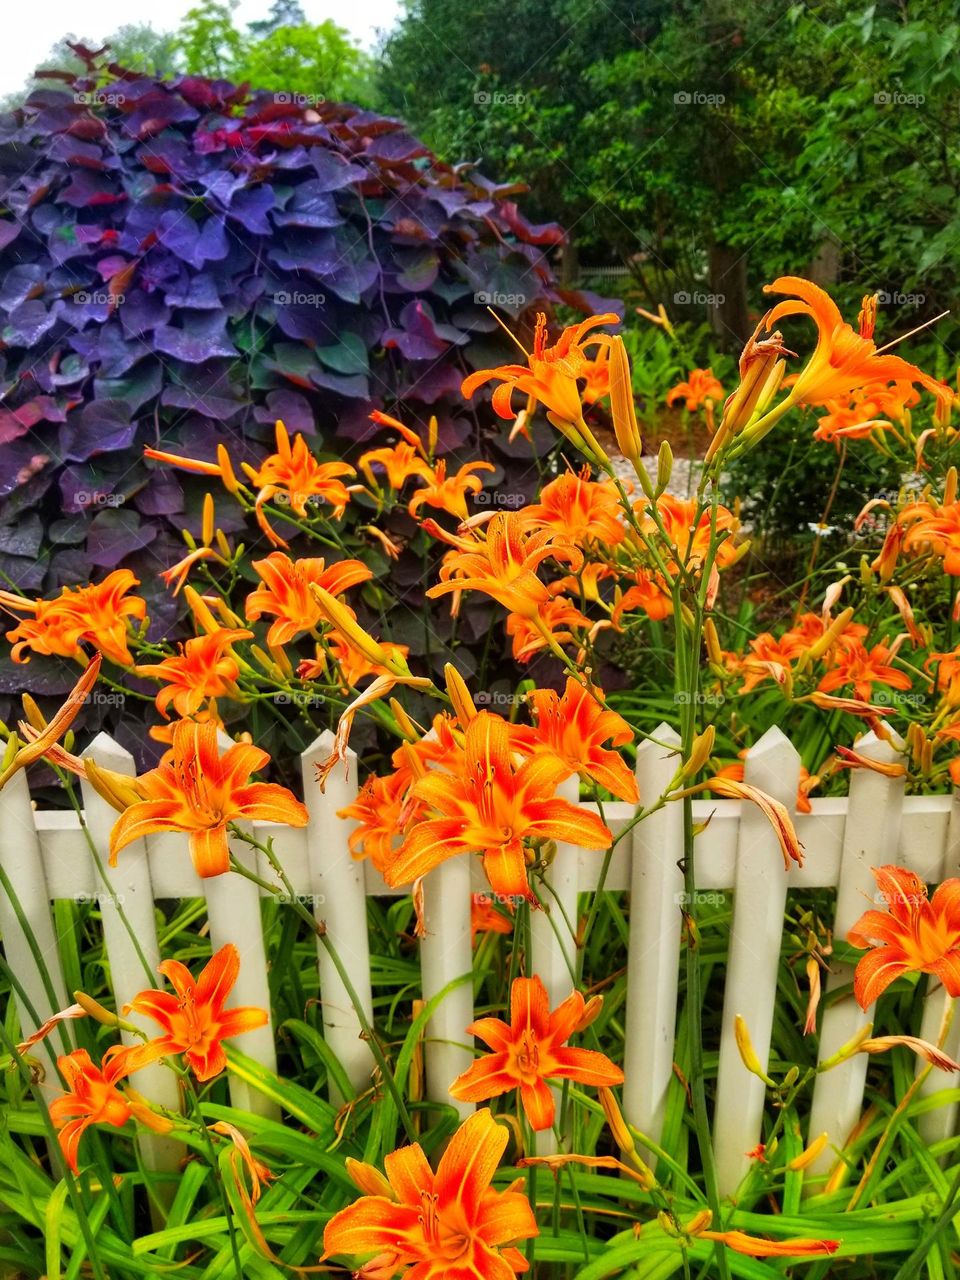 tiger lilies in a row